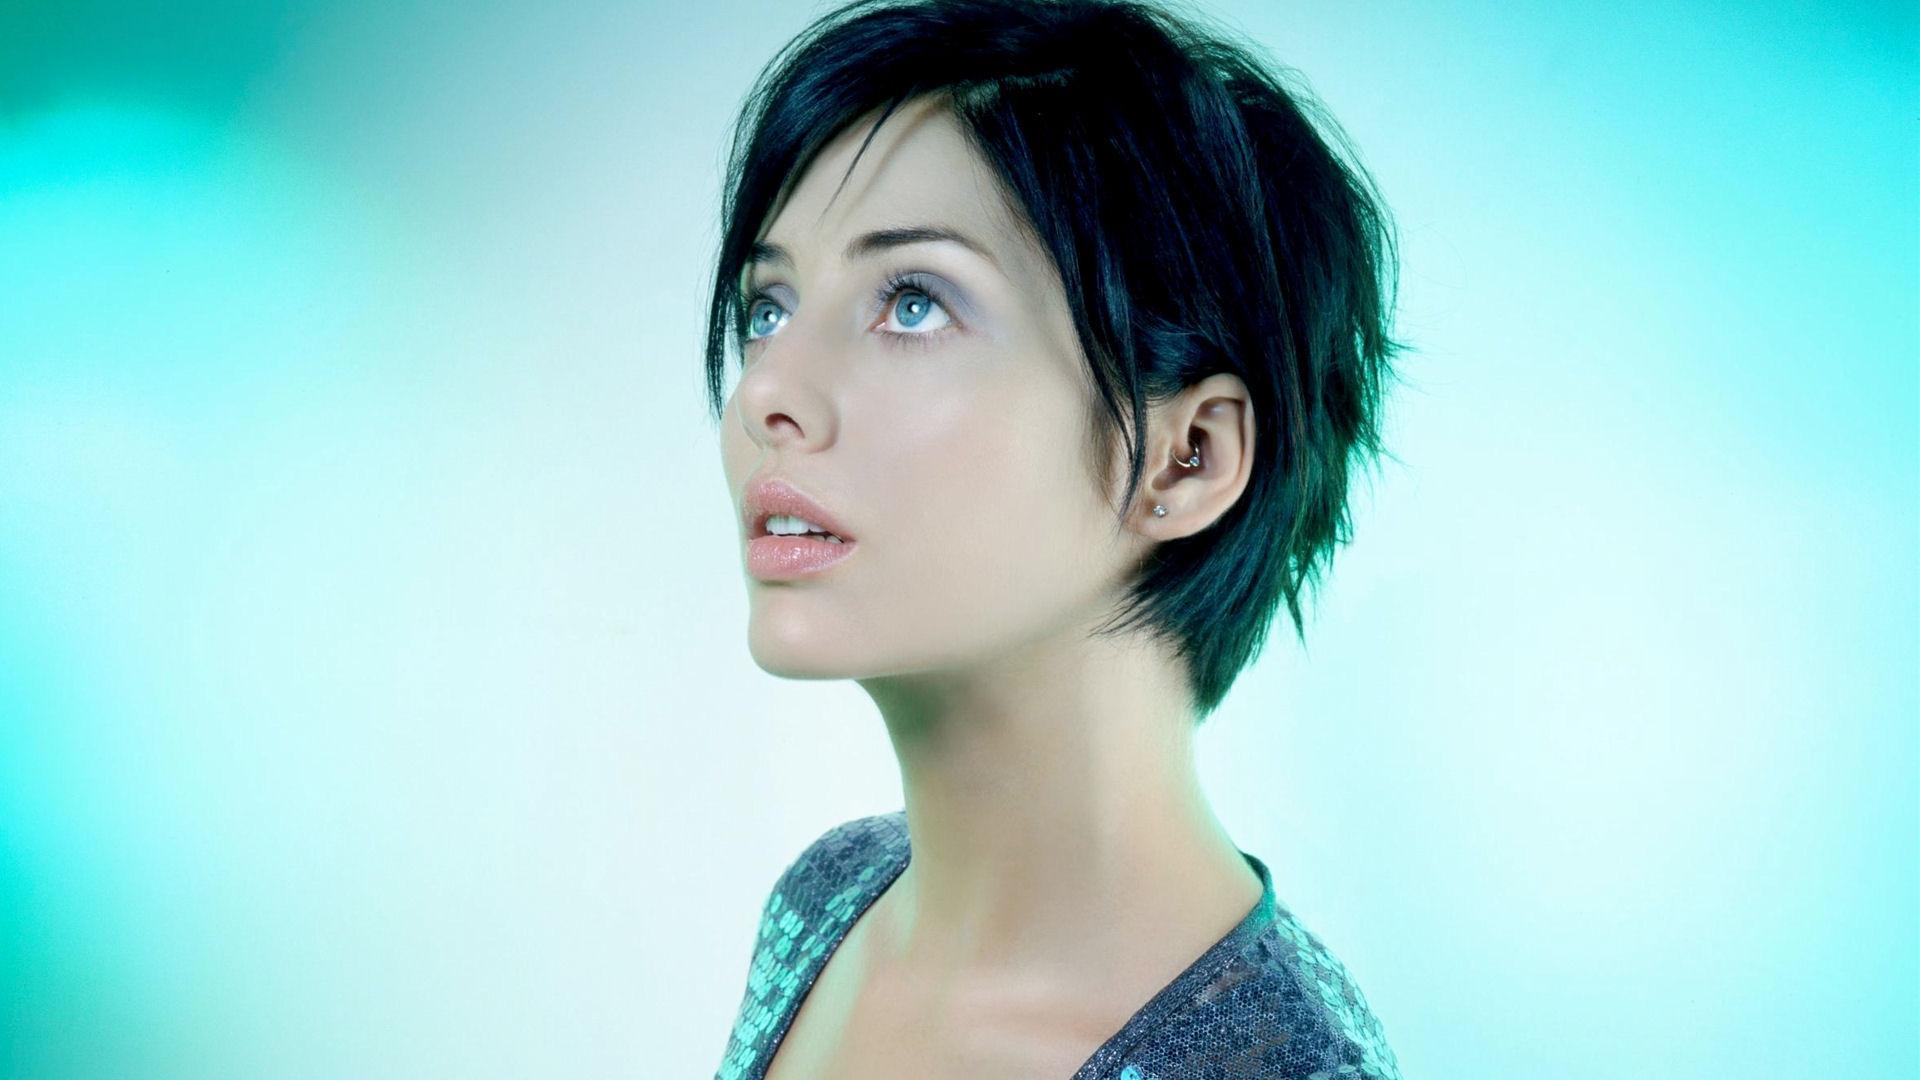 Natalie Imbruglia Wallpaper Image Photo Picture Background